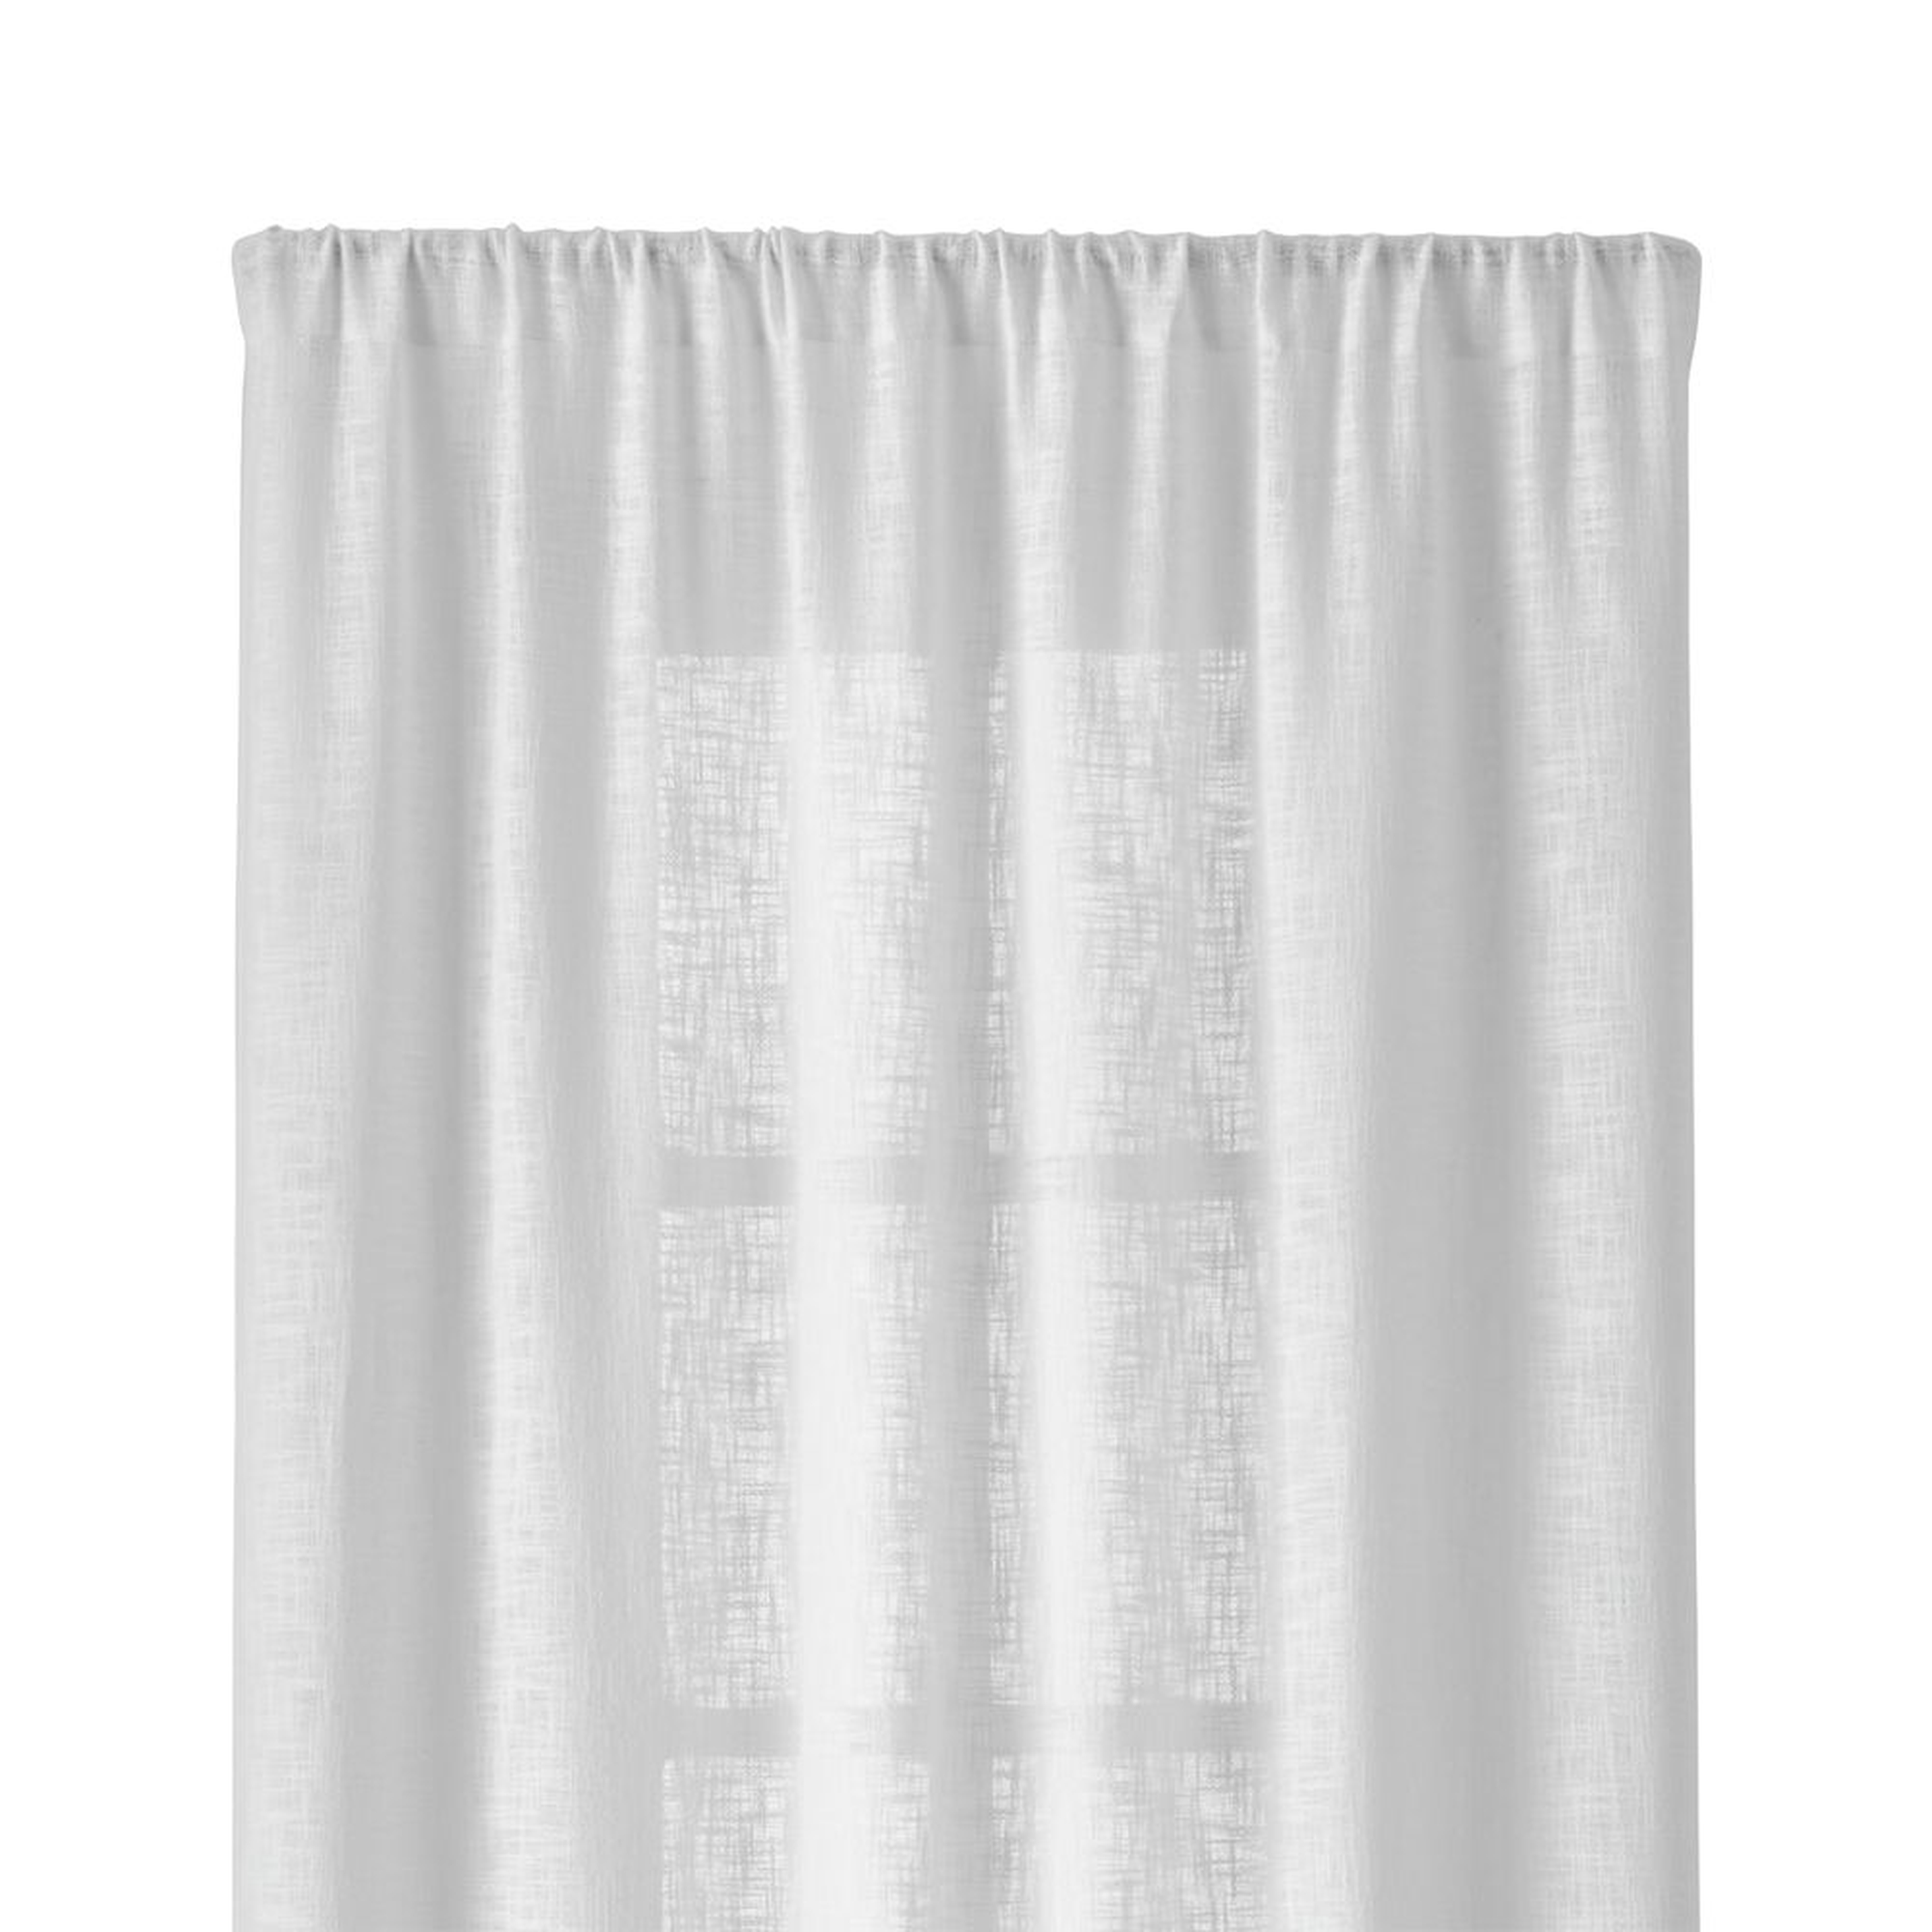 Lindstrom White 48"x96" Curtain Panel - Crate and Barrel